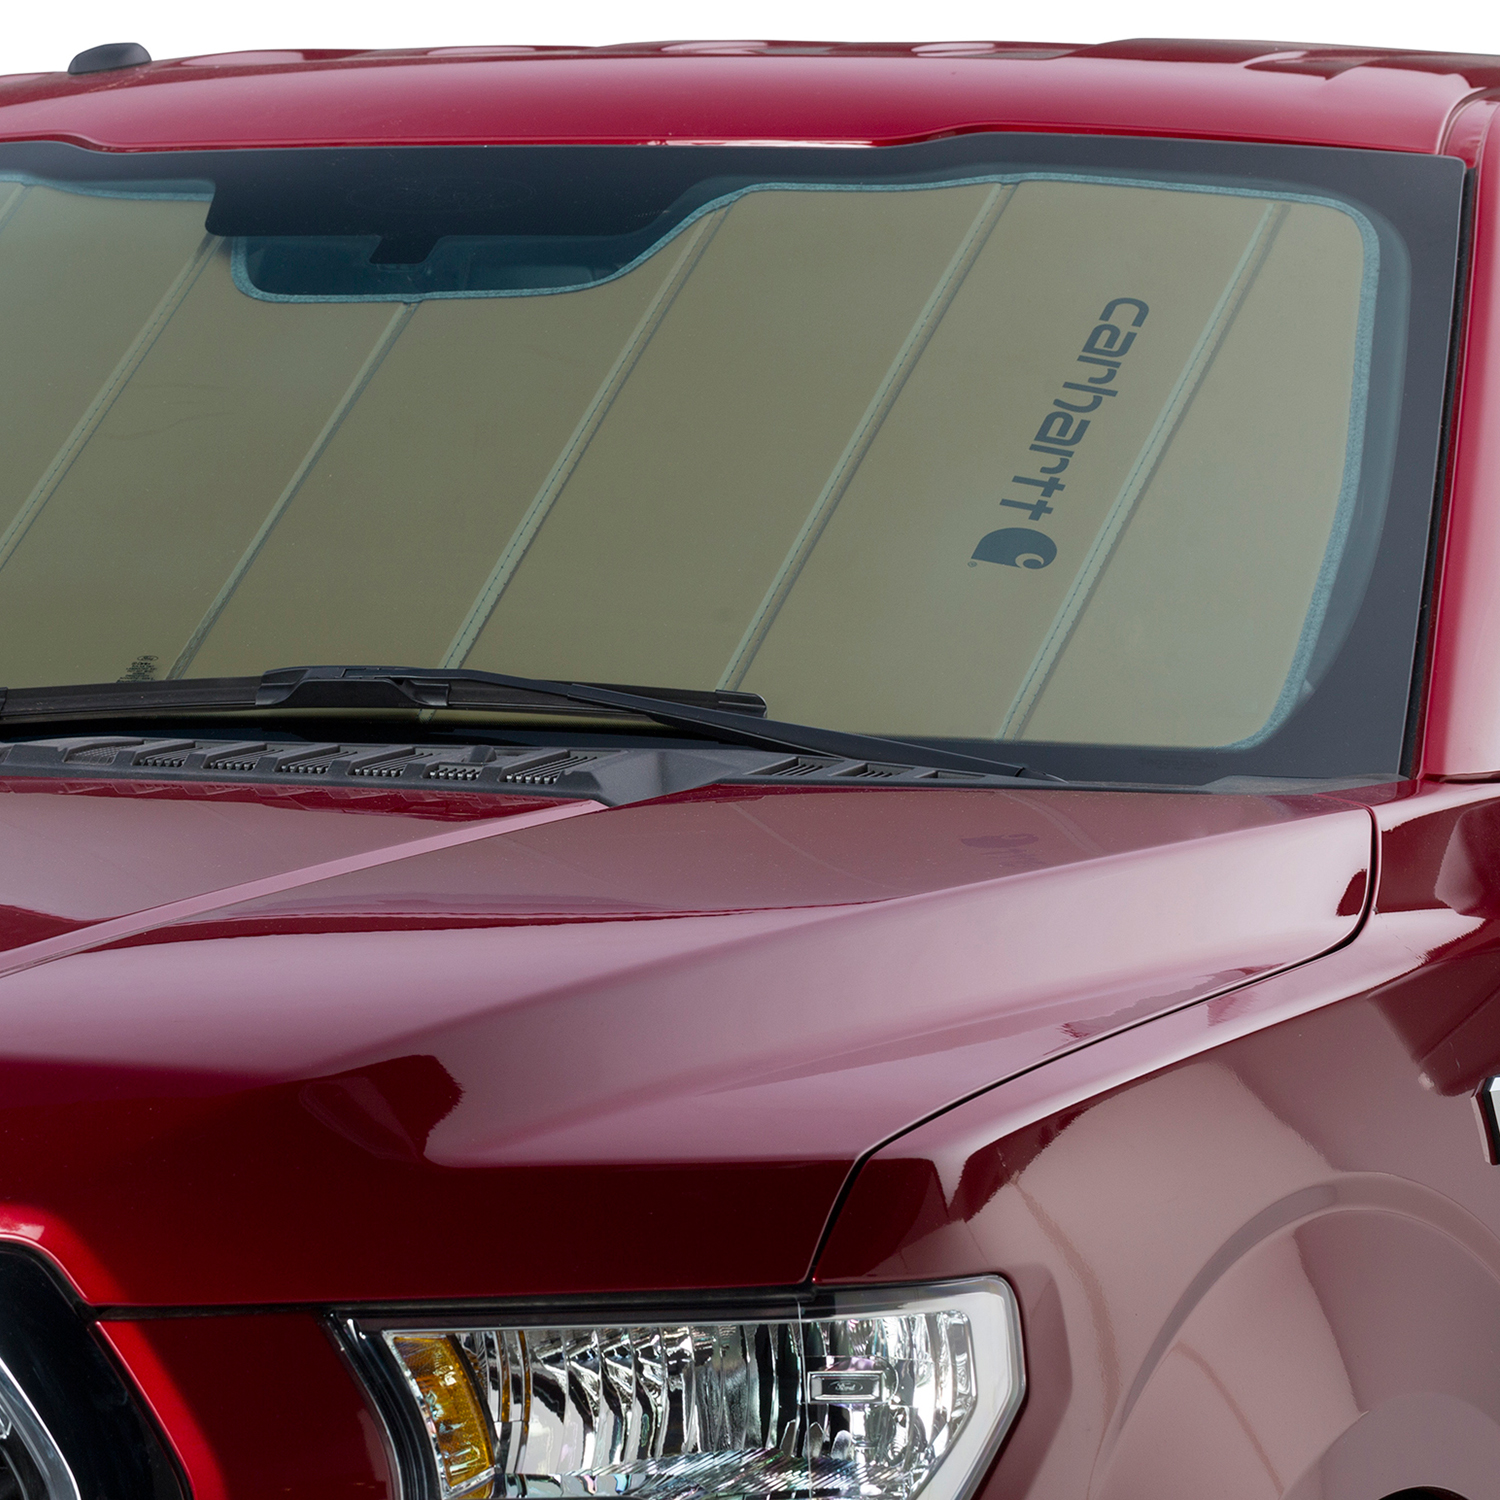 Give your truck or SUV the rugged protection they need with our exclusive Carhartt UVS100 Sunscreens. Truck windshields are large and allow a ton of light to enter which will not only cook your truck but also rapidly damage your interior. The Carhartt UVS100 is designed to block out light, damaging UV rays, heat, and are custom-fit to your exact windshield.